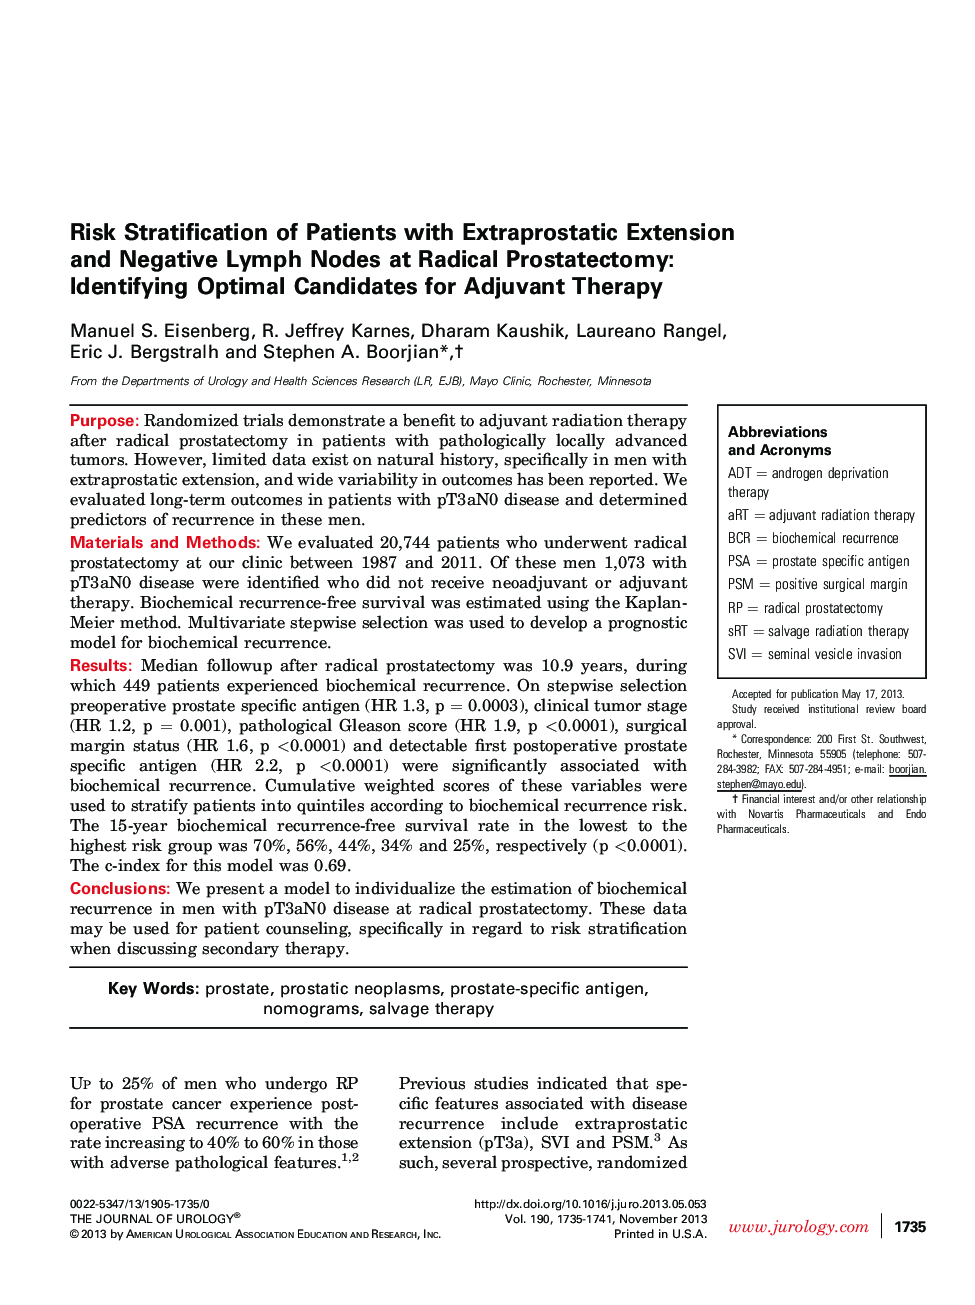 Risk Stratification of Patients with Extraprostatic Extension and Negative Lymph Nodes at Radical Prostatectomy: Identifying Optimal Candidates for Adjuvant Therapy 